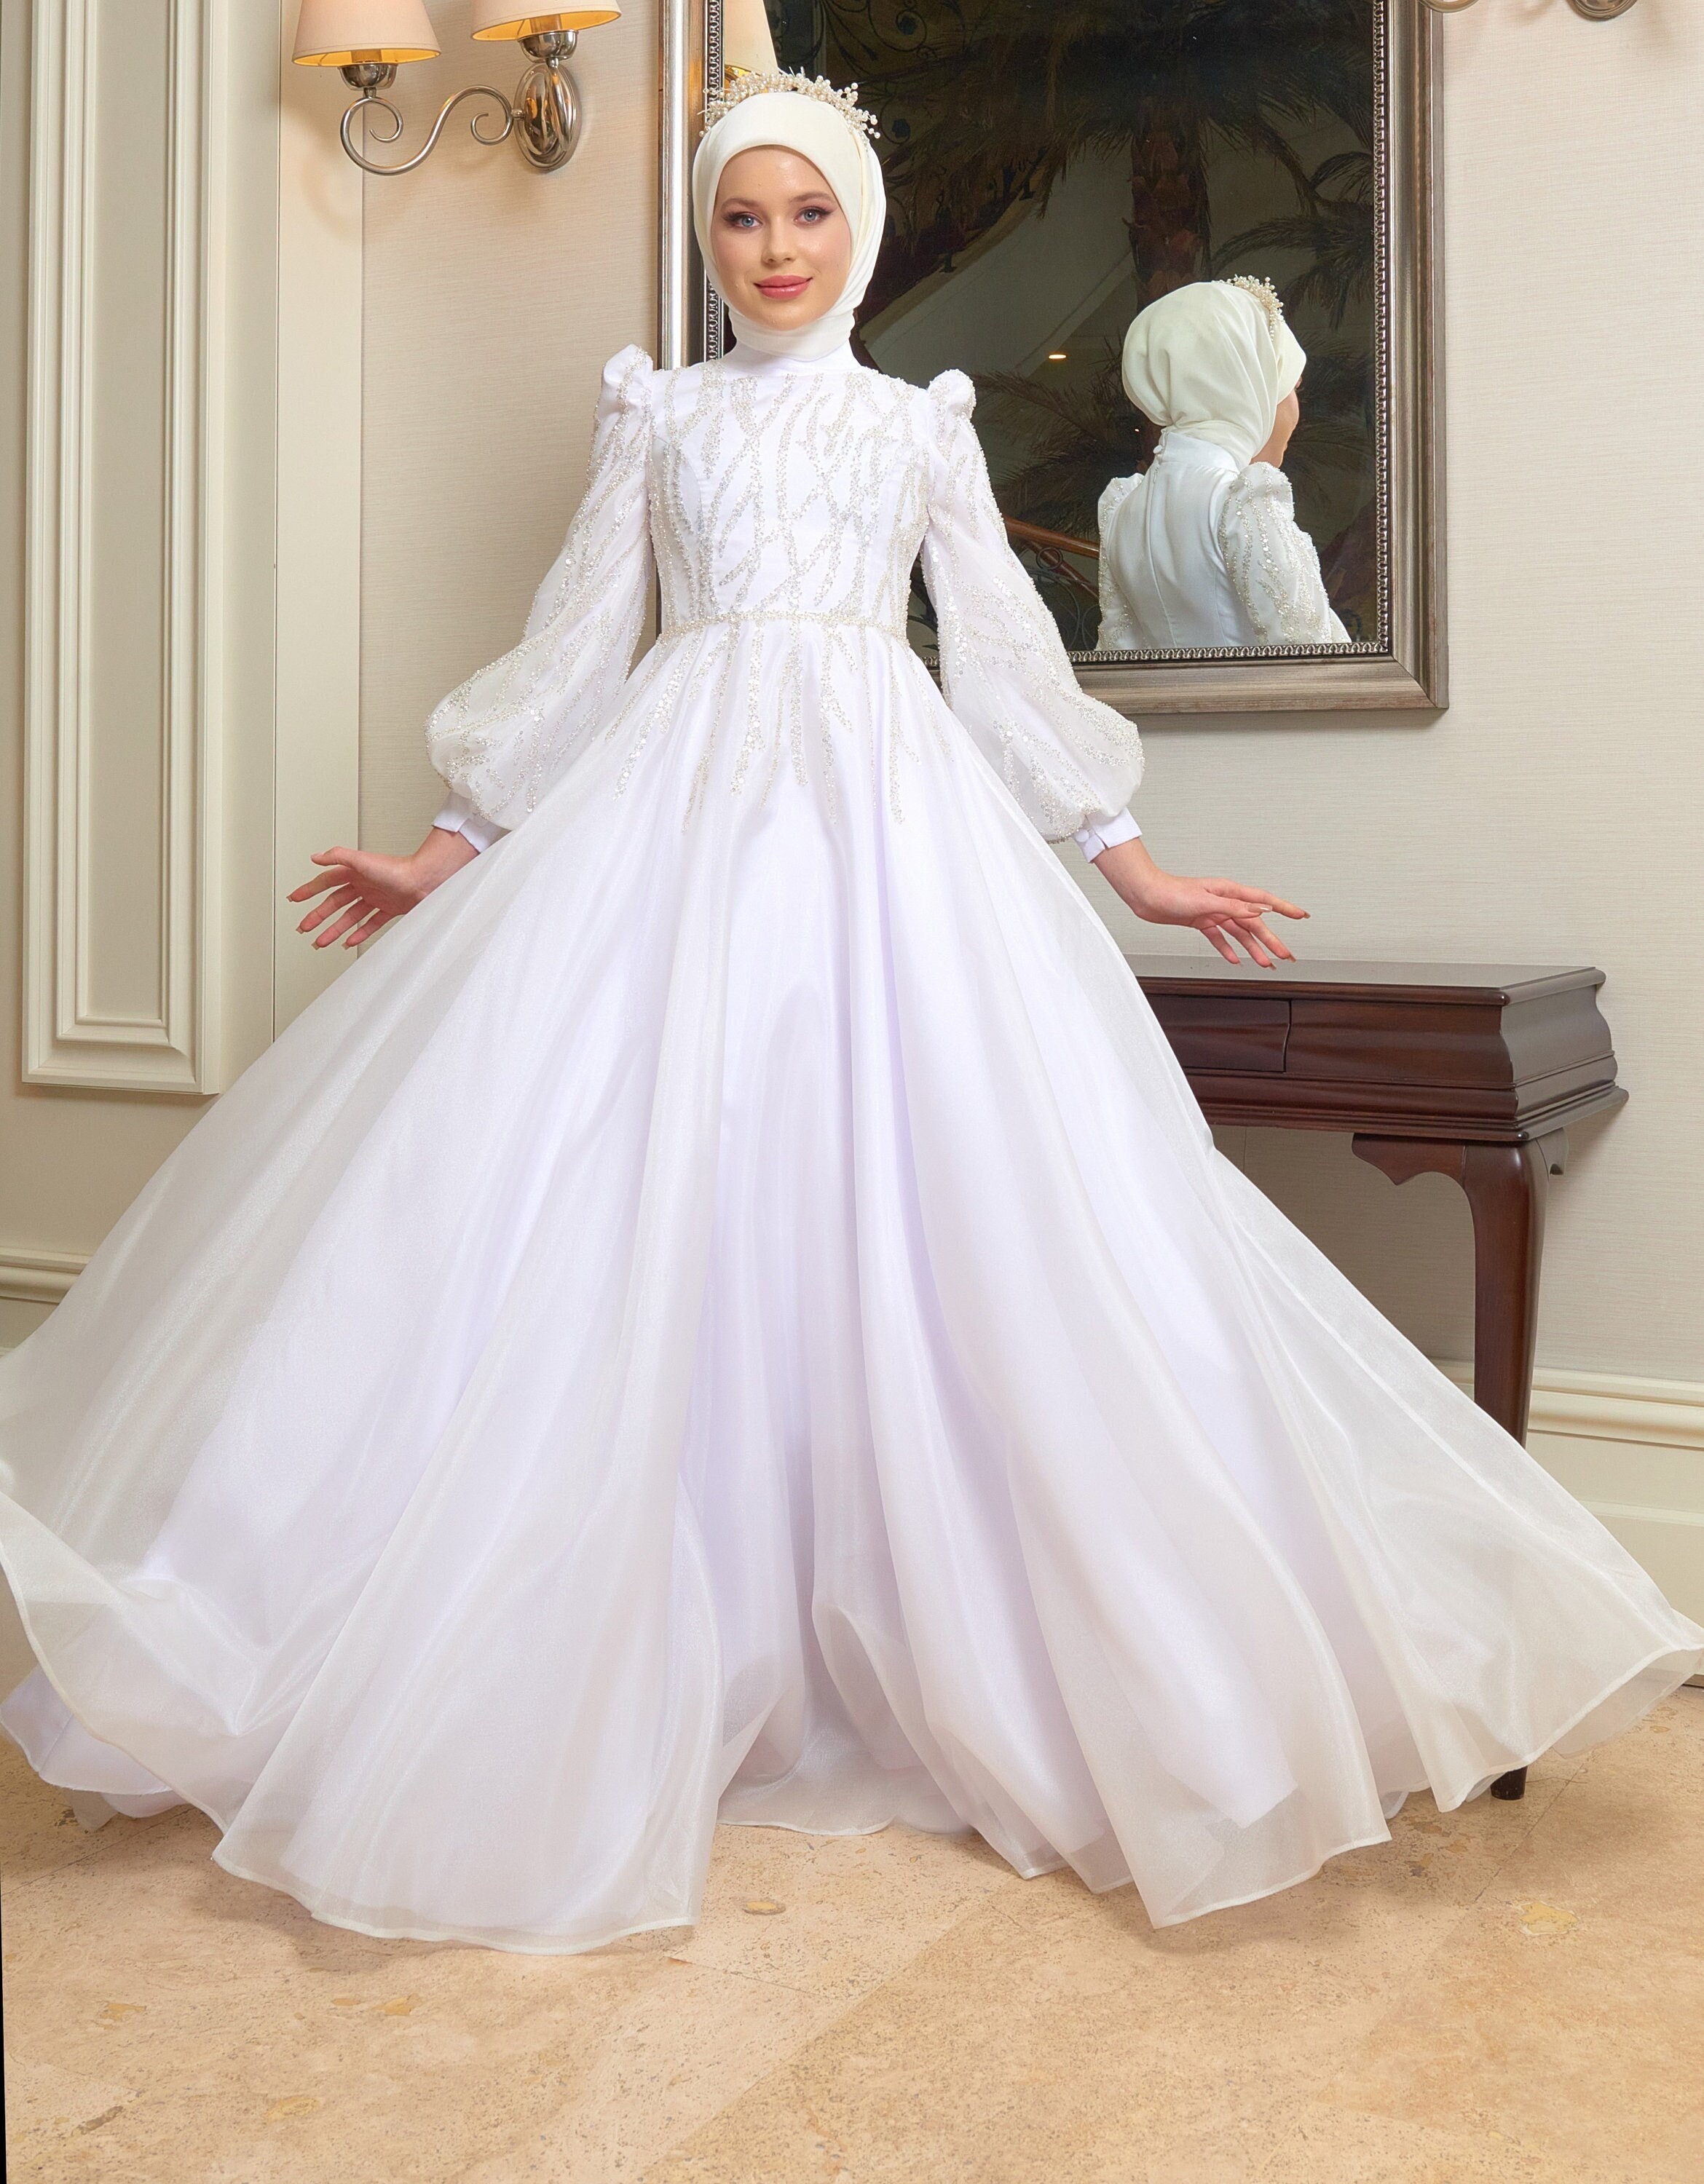 Princess High Neck Muslim Wedding Dresses Ball Gown Long Sleeves Lace  Appliques | eBay